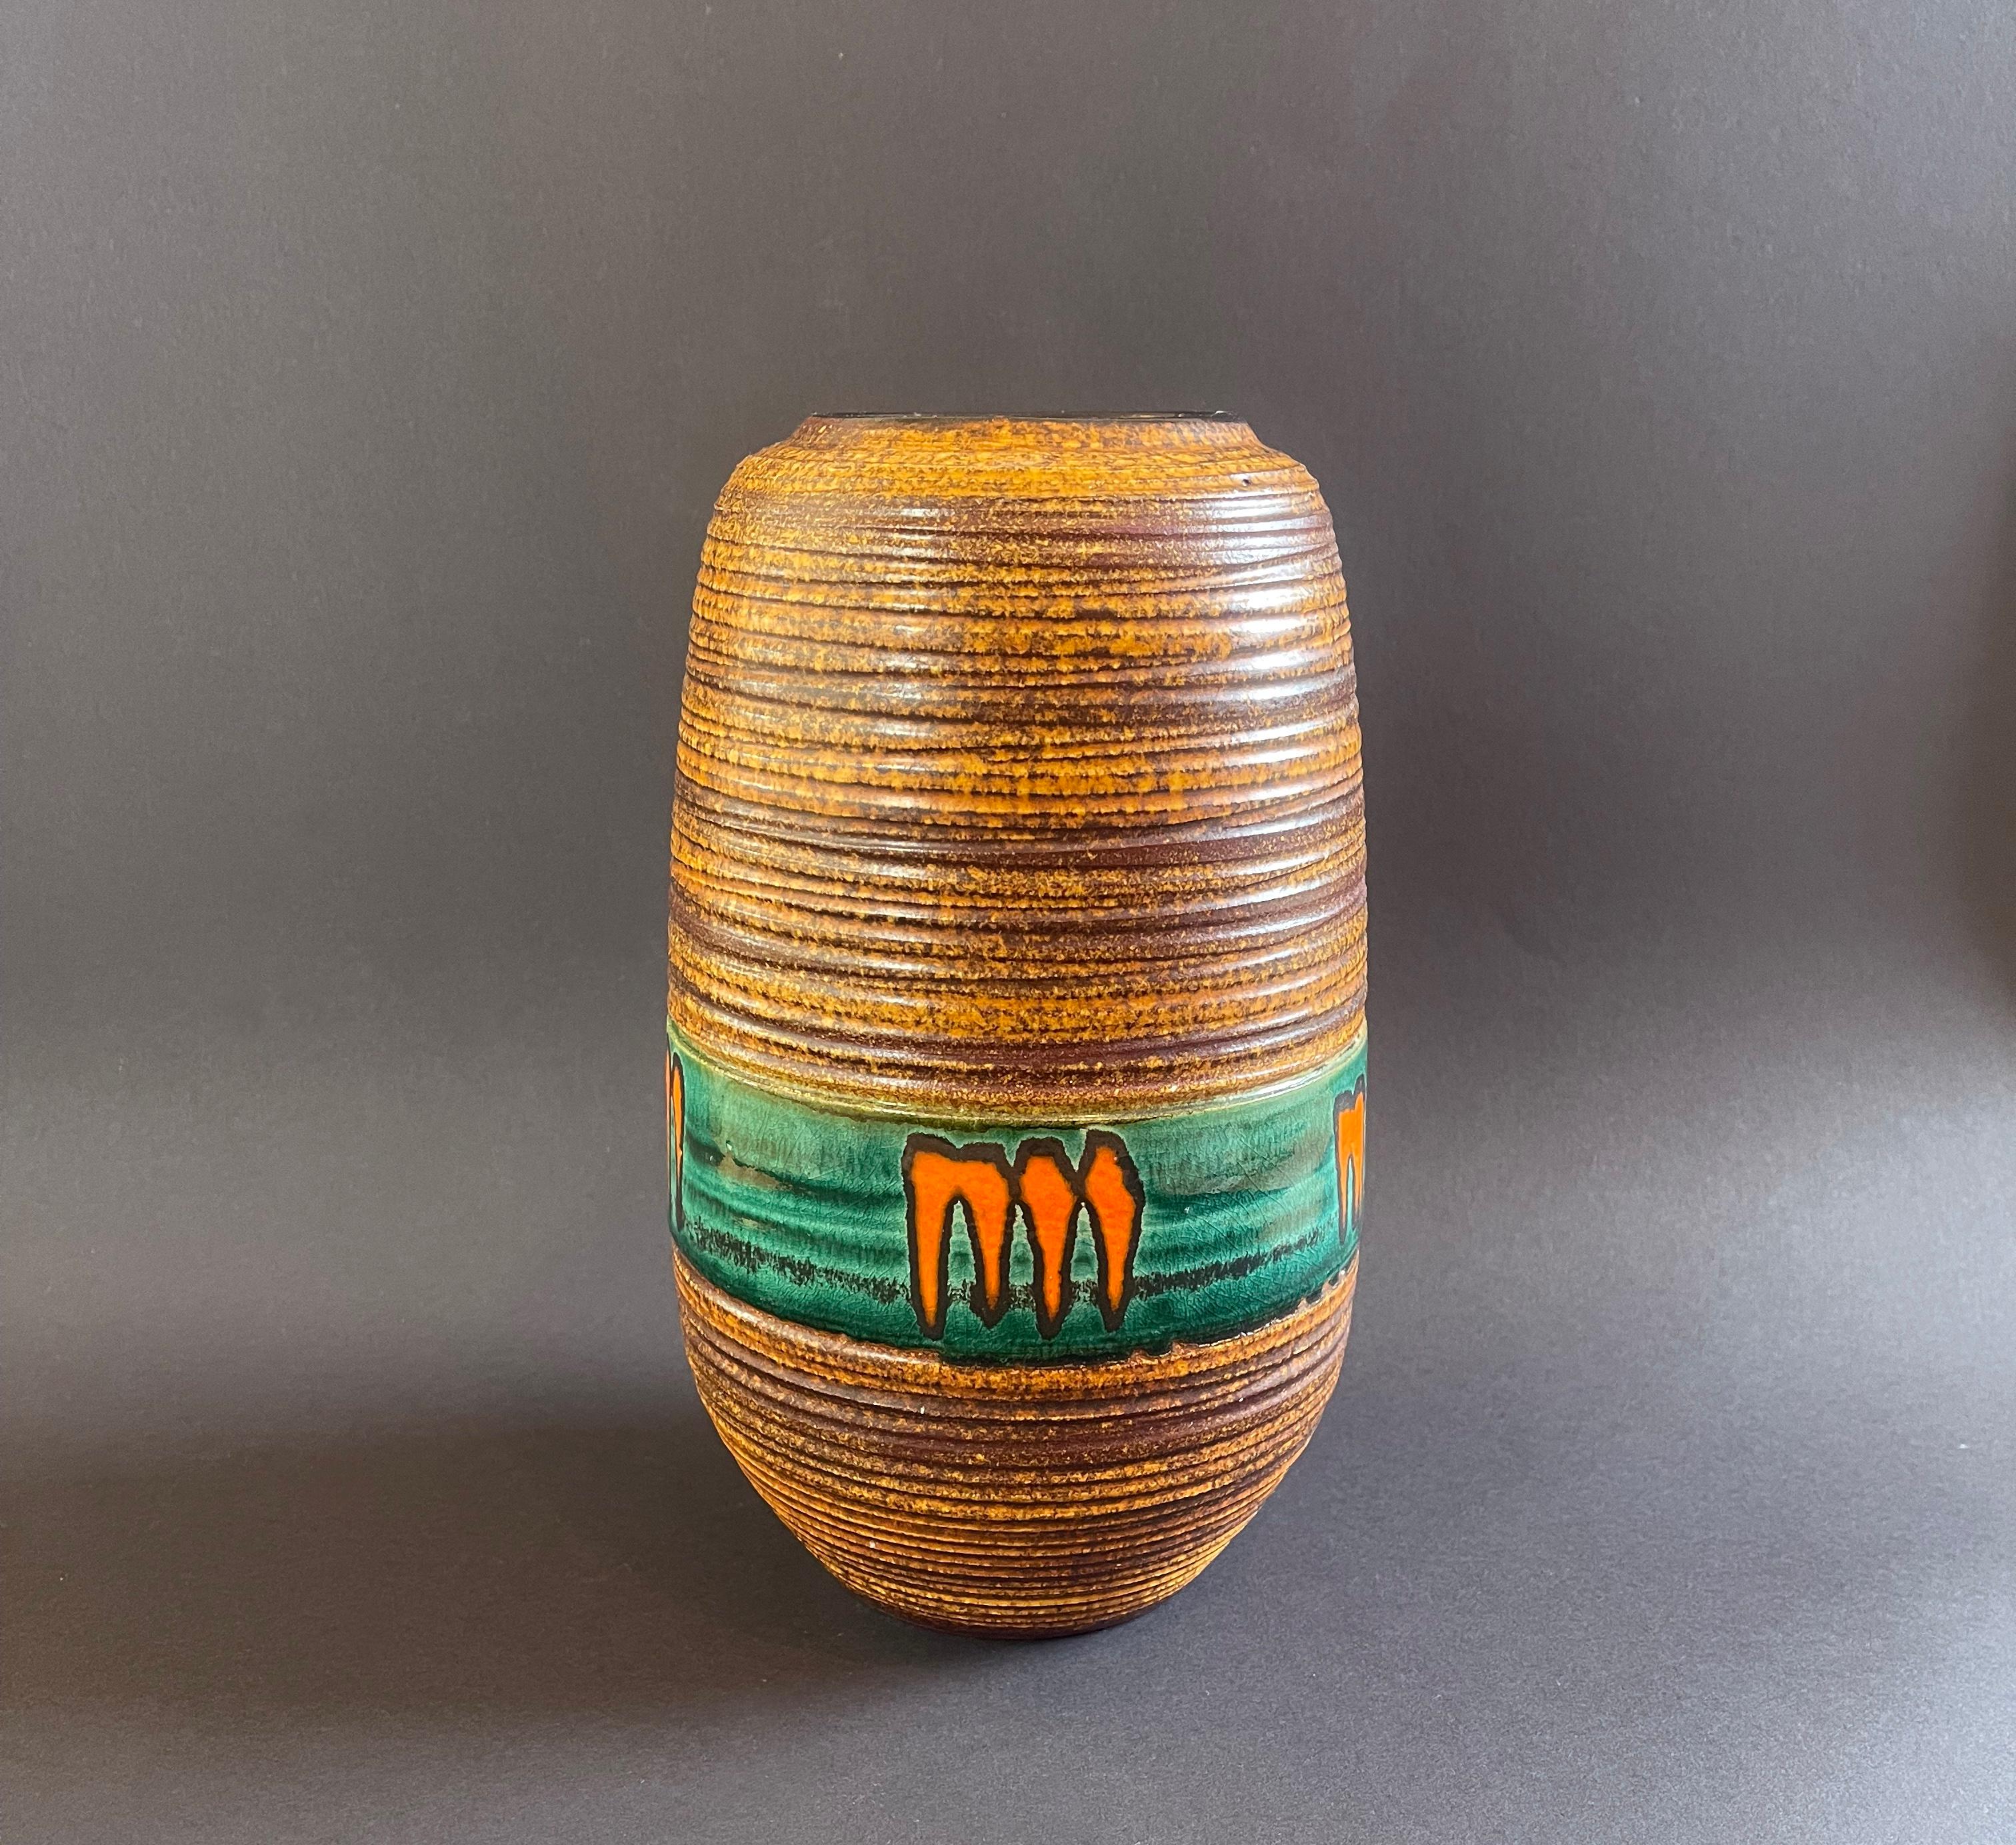 Funky original mid-century ceramic vase in the time of ''Fat Lava'' pottery.
Here in a typical German orange to brown speckled and stripe textured glaze, featuring the absolutely fun and bright orange
carrot or ''monster'' claw decoration on a dark